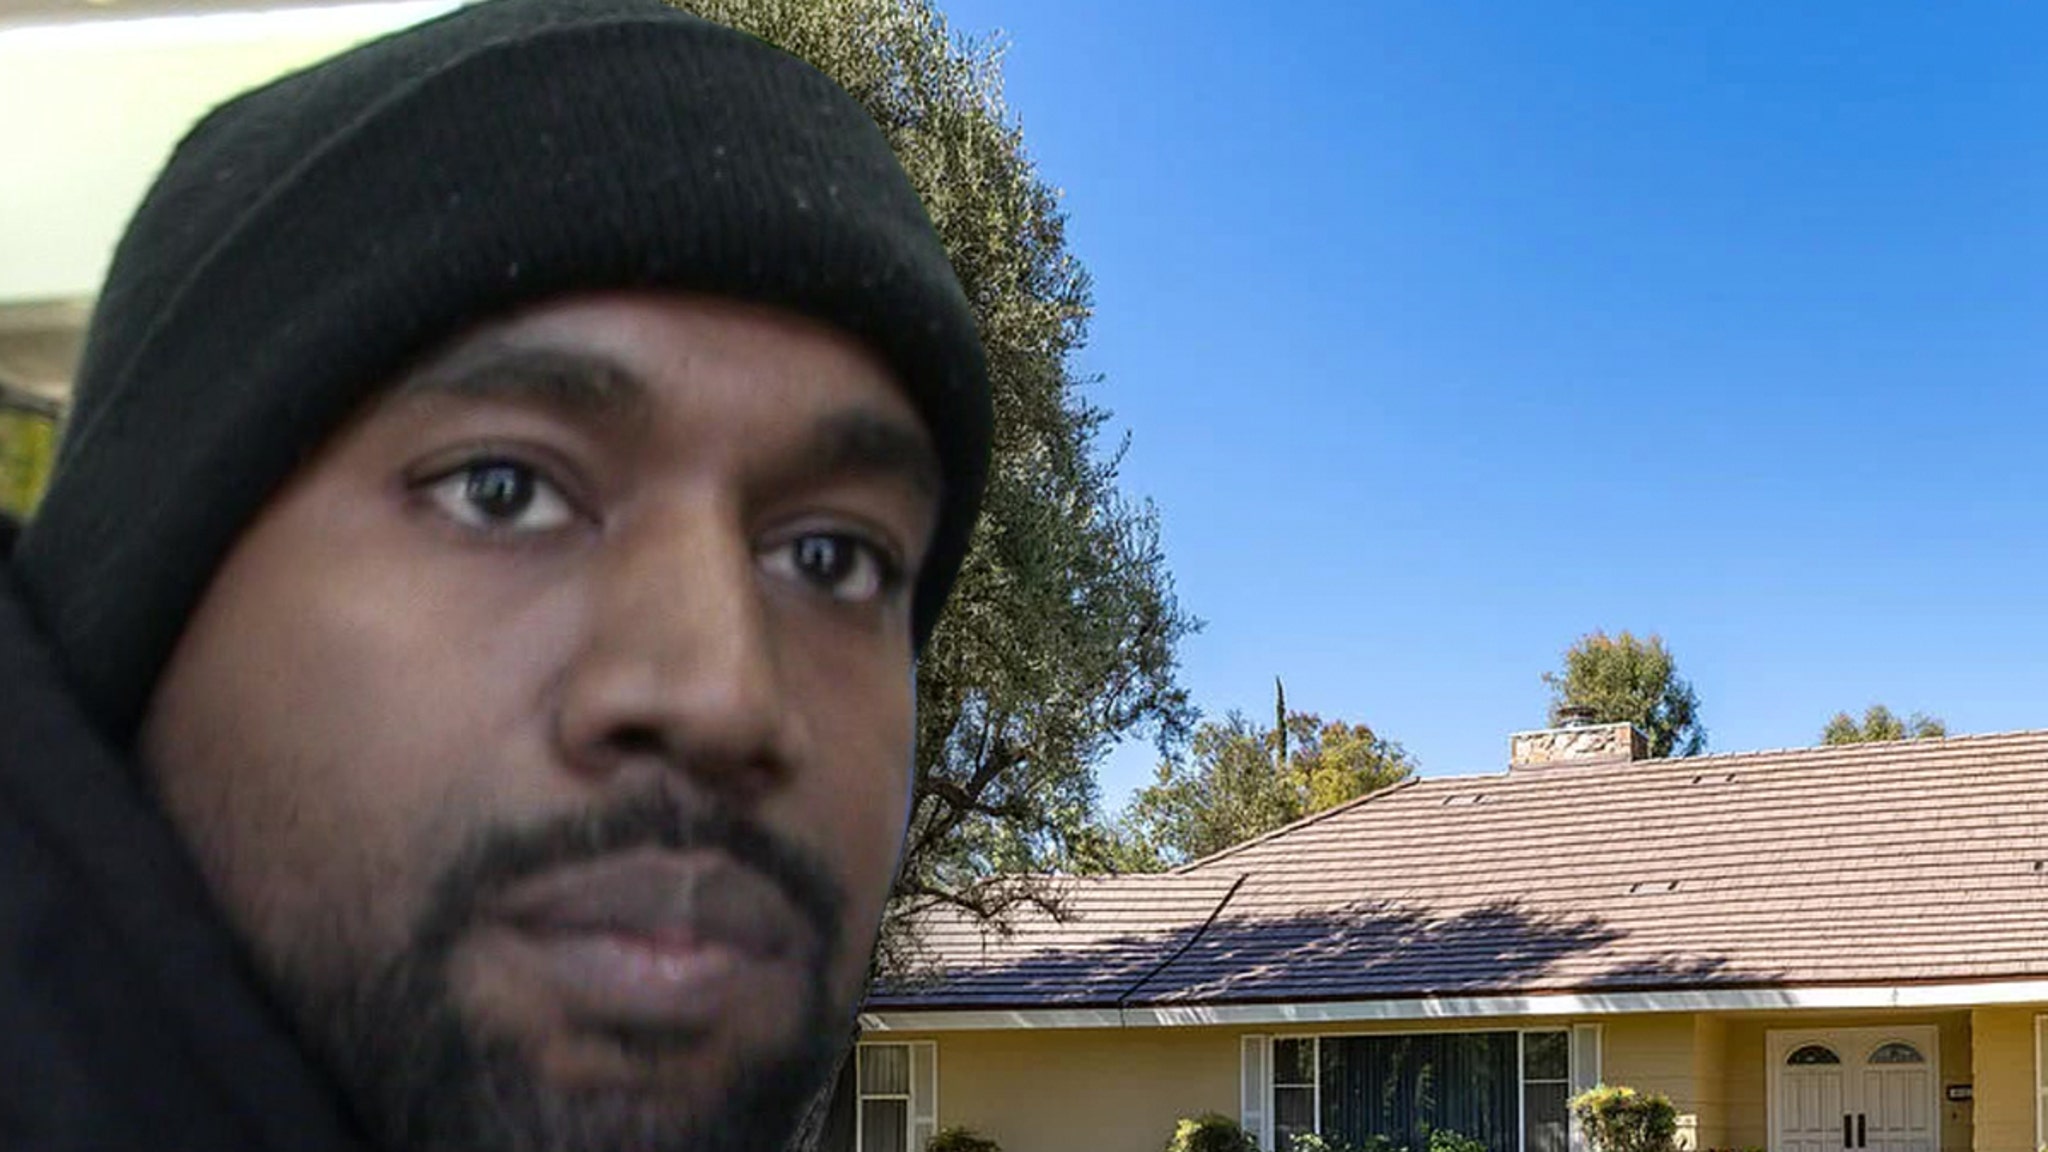 Kanye West’s House Next to Kim’s on Ice, No Evidence He’s Moving In